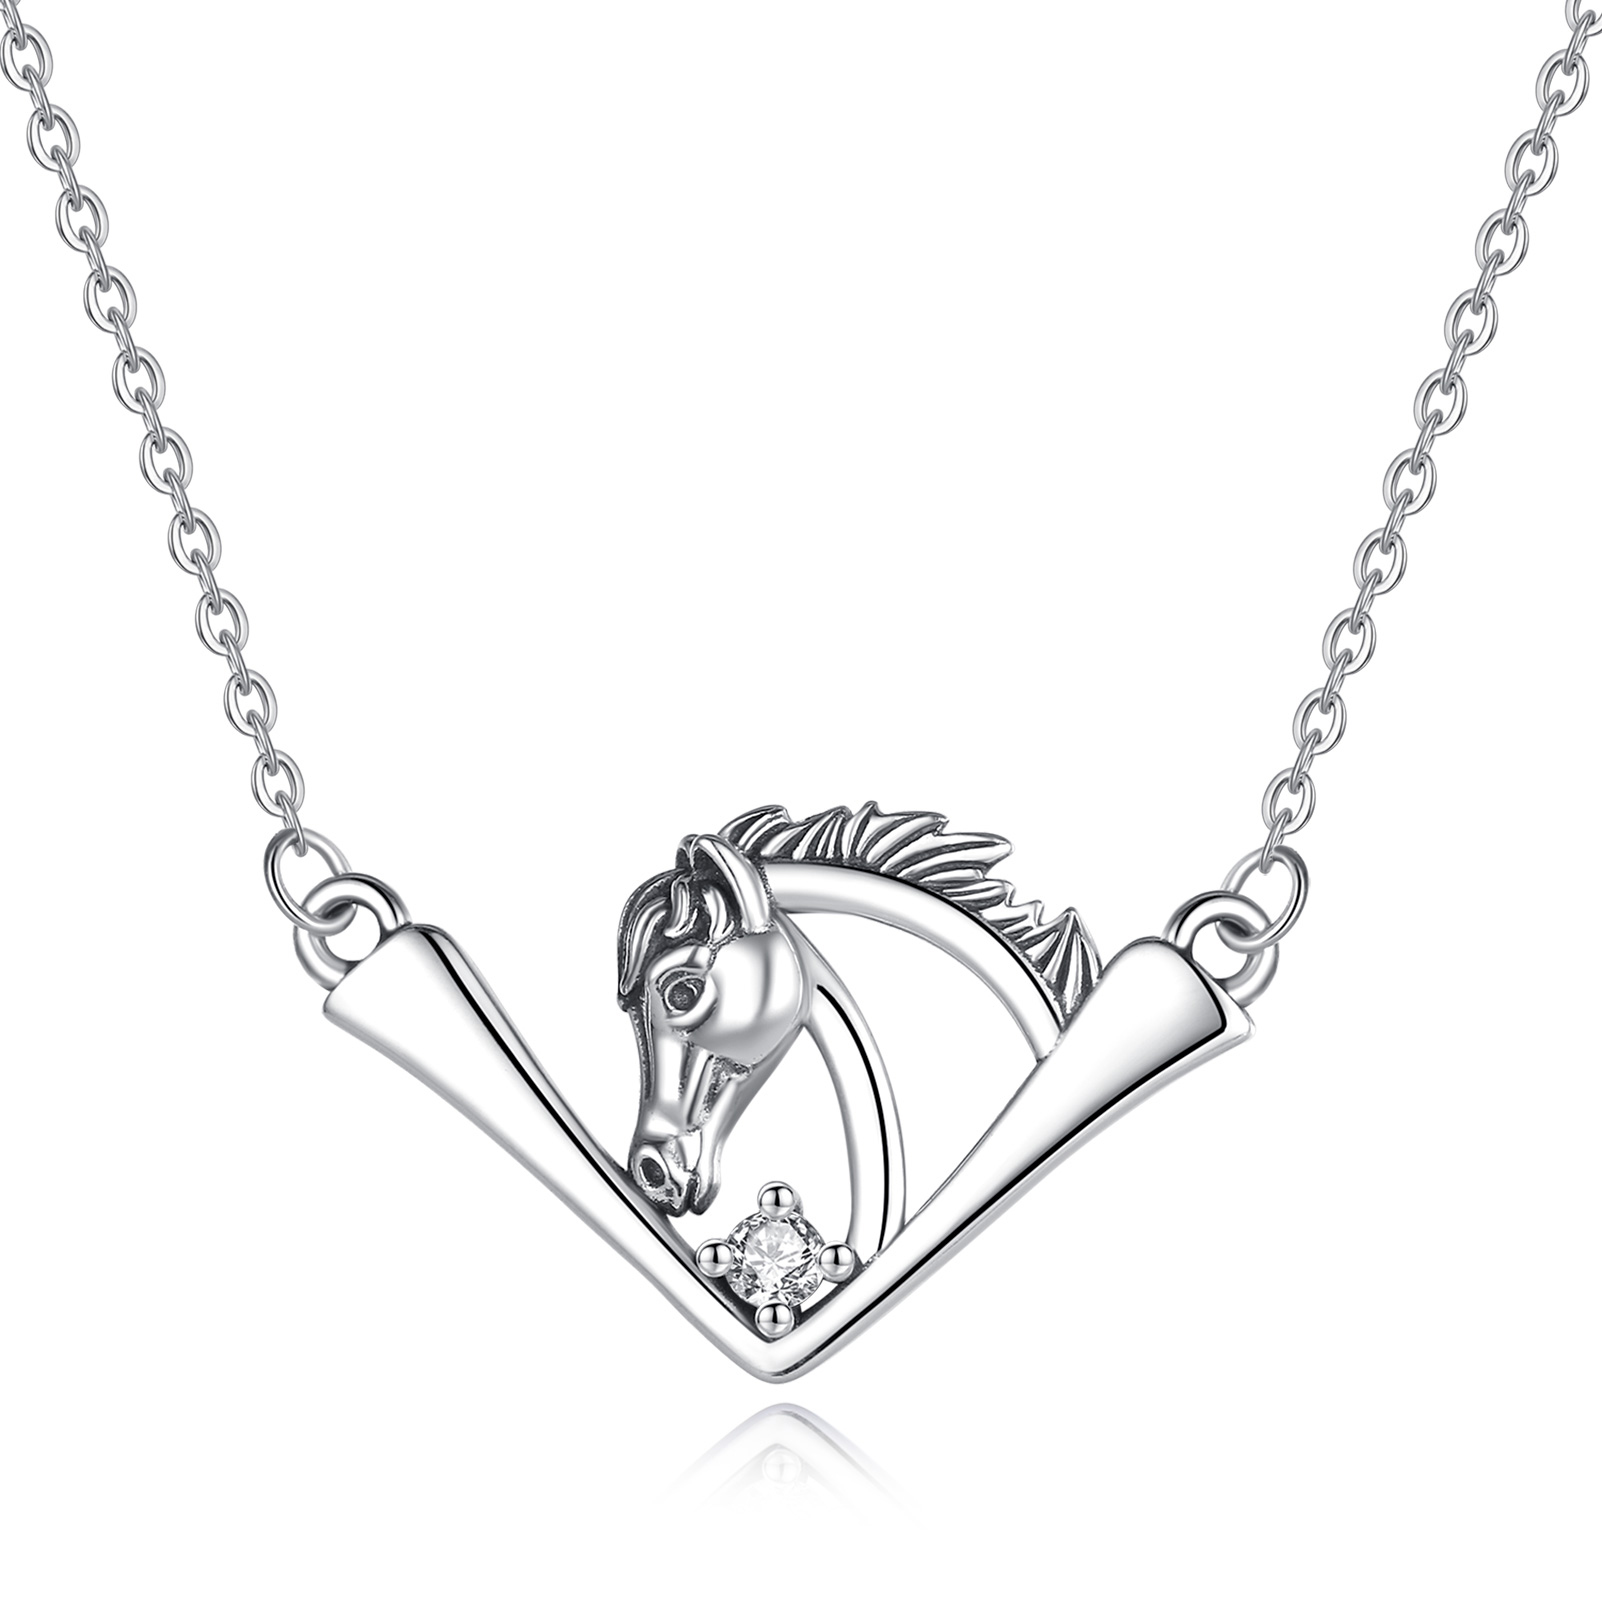 Merryshine Original Design Jewelry 925 Sterling Silver Boomerang Horse Necklace with Chain